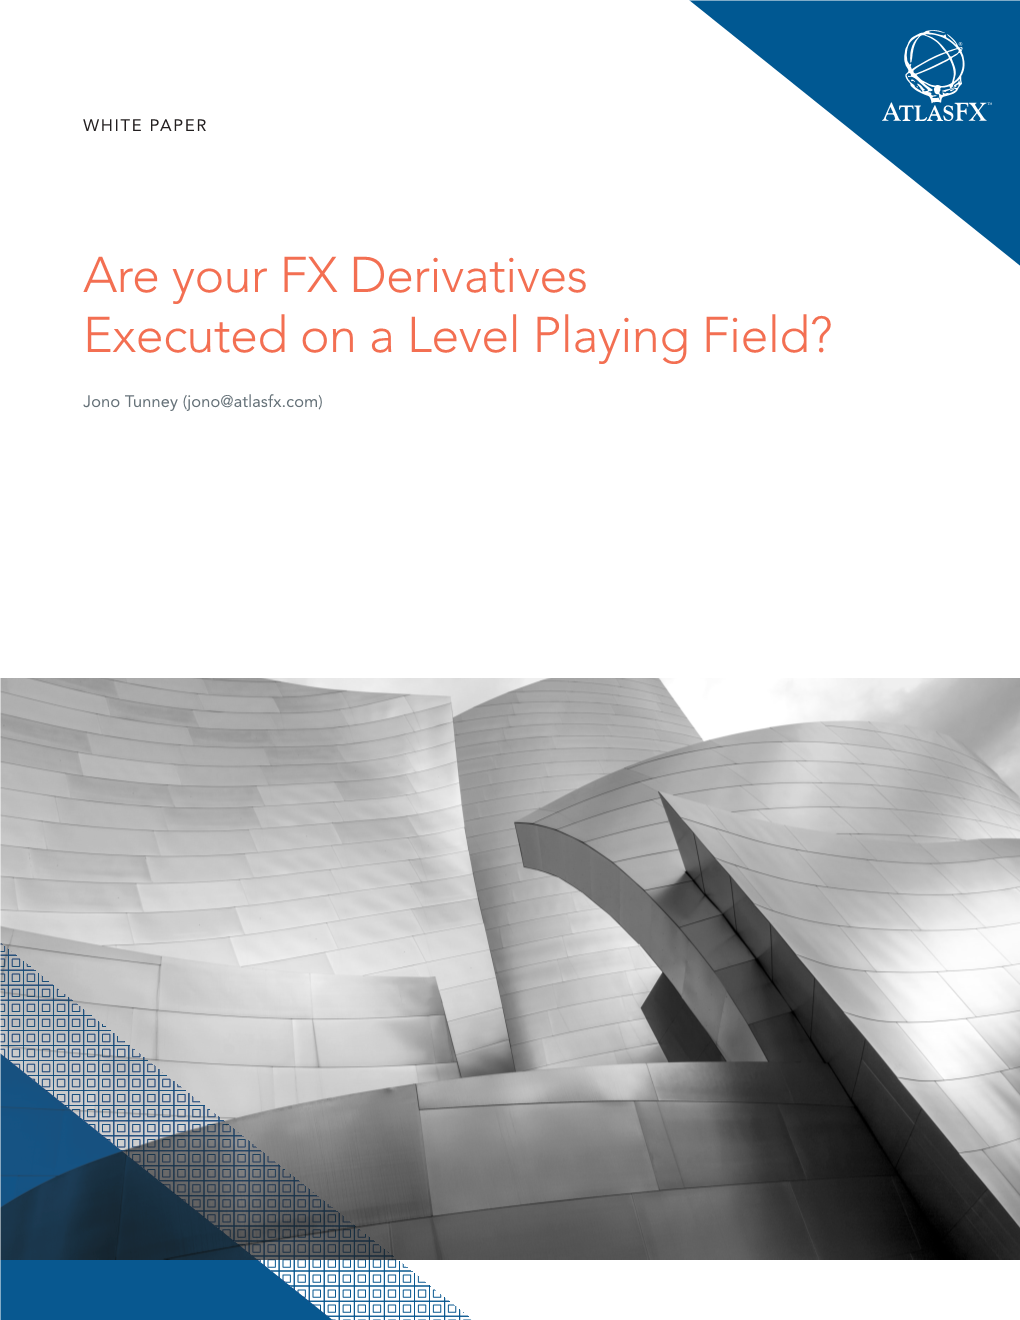 Are Your FX Derivatives Executed on a Level Playing Field?